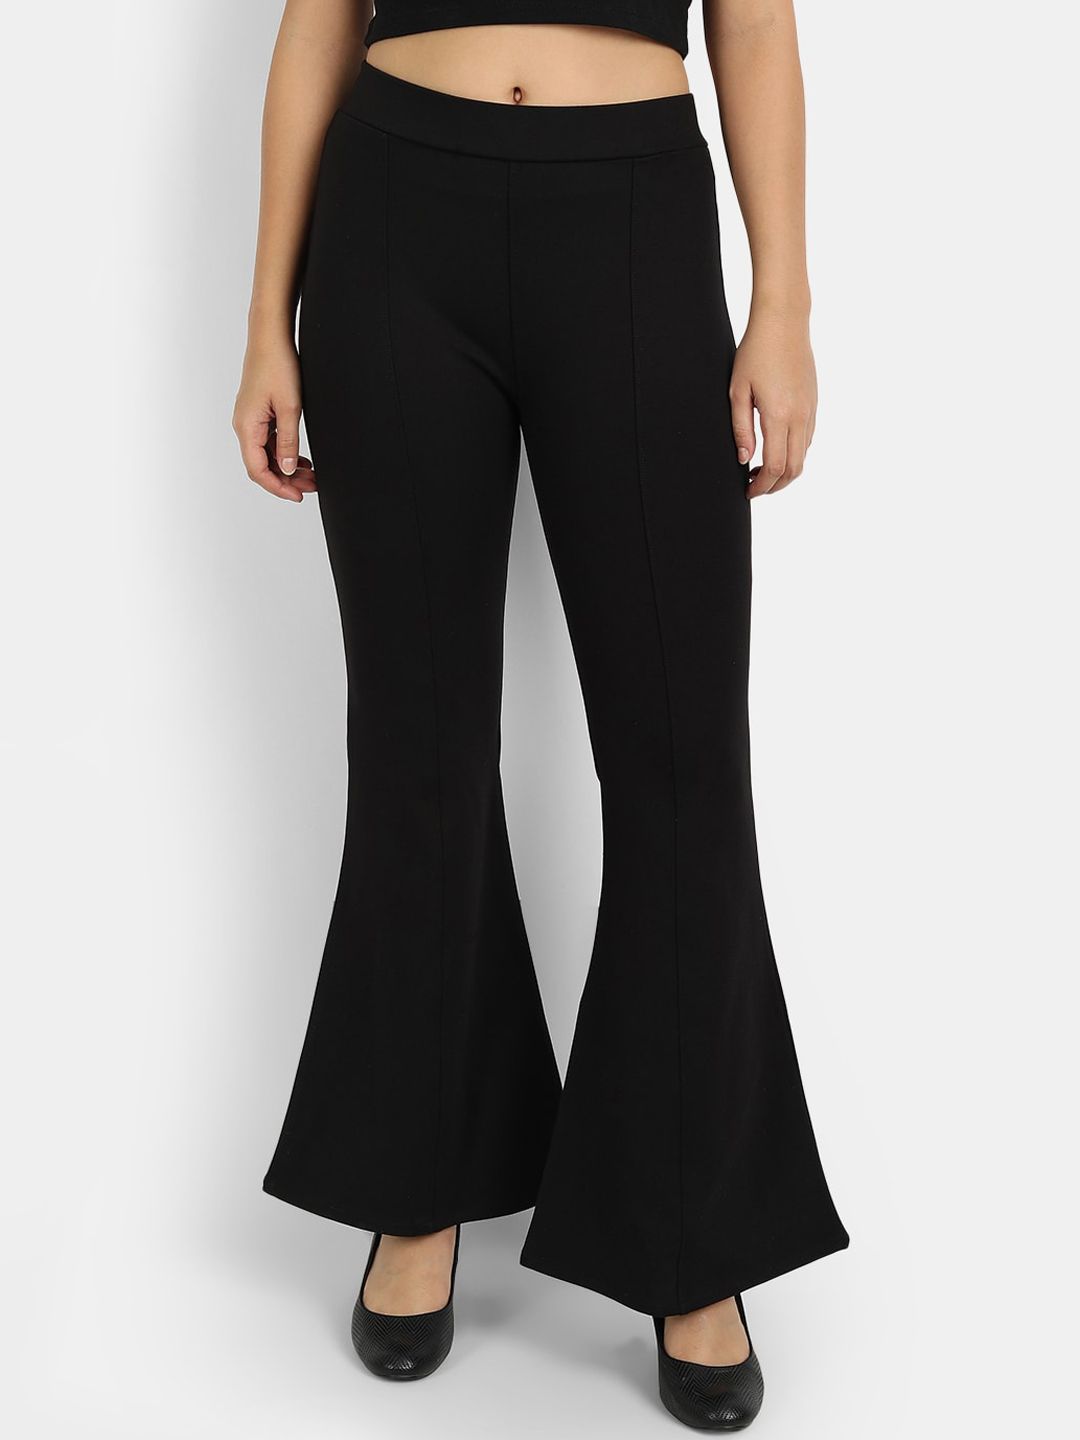 Next One Women Black Flared High-Rise Trousers Price in India